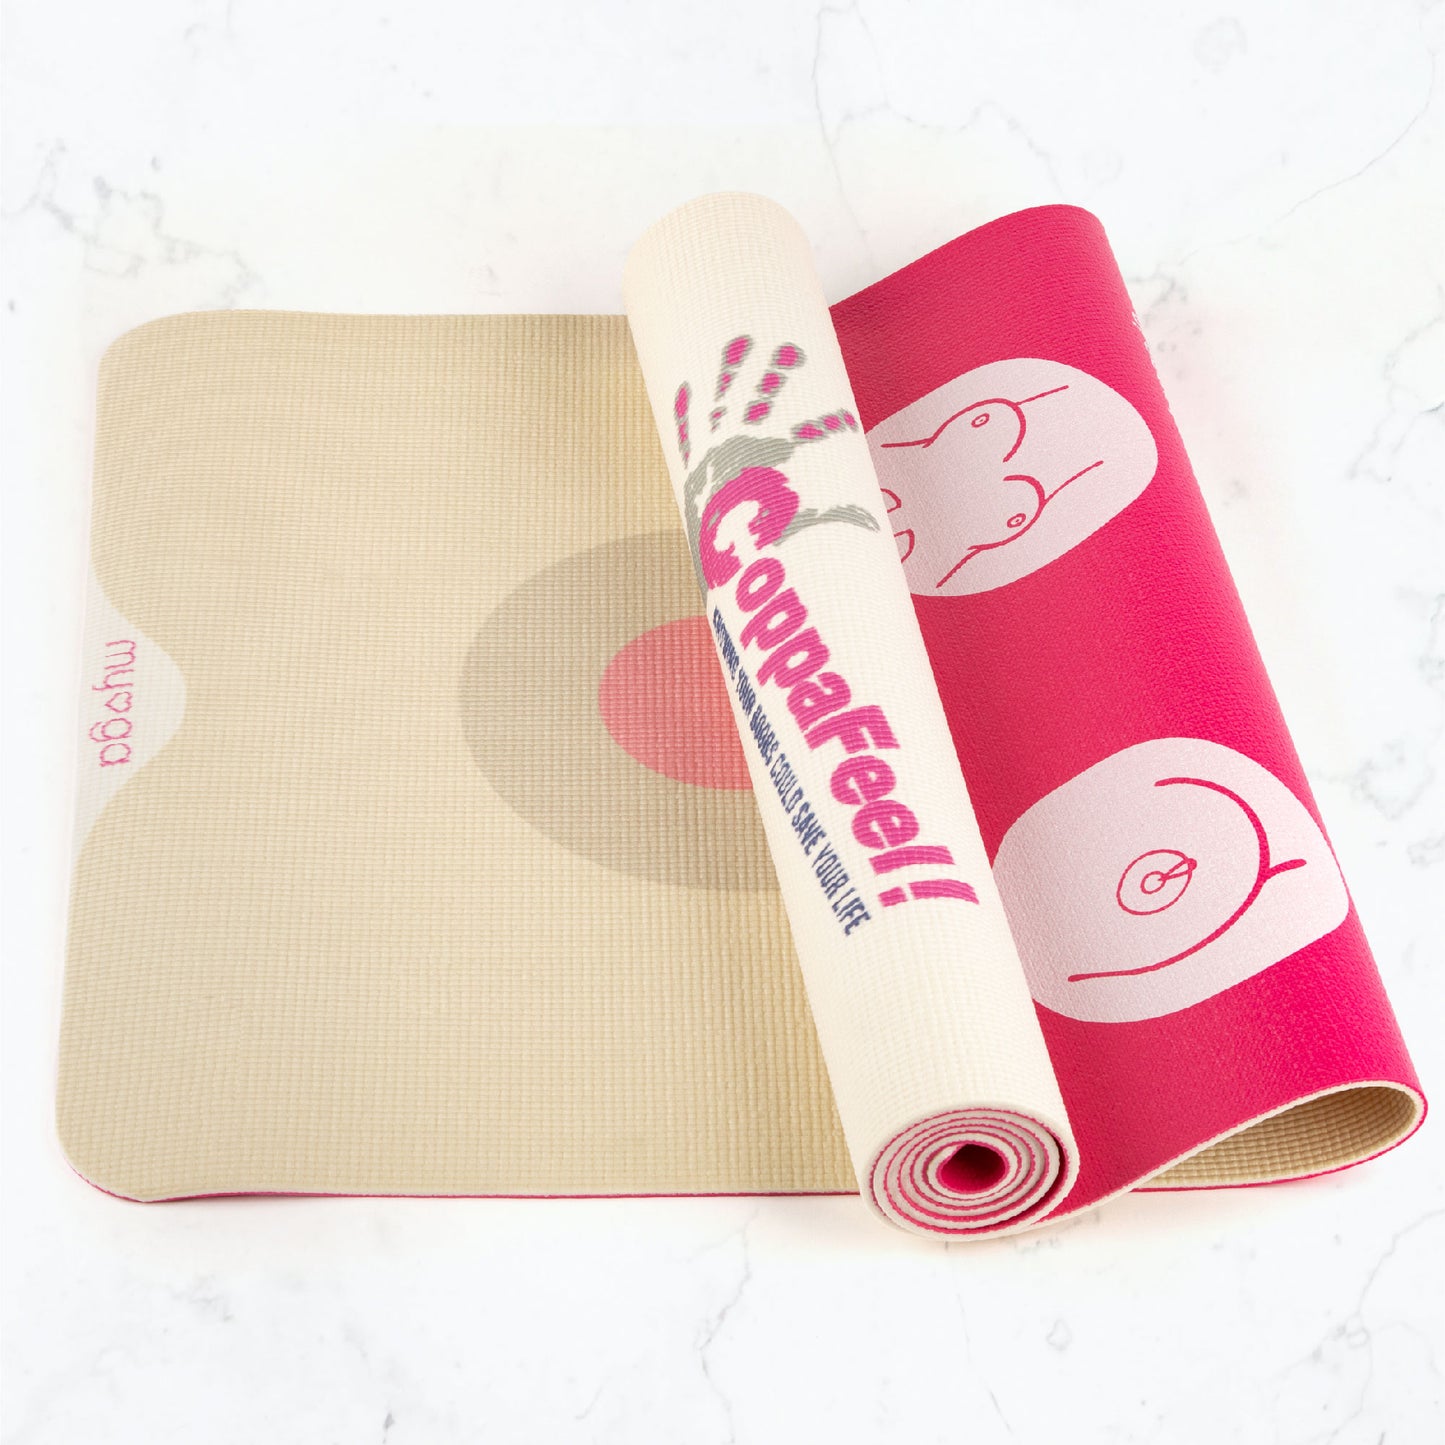 Breast Cancer Awareness Charity CoppaFeel! Just Boobs Mat